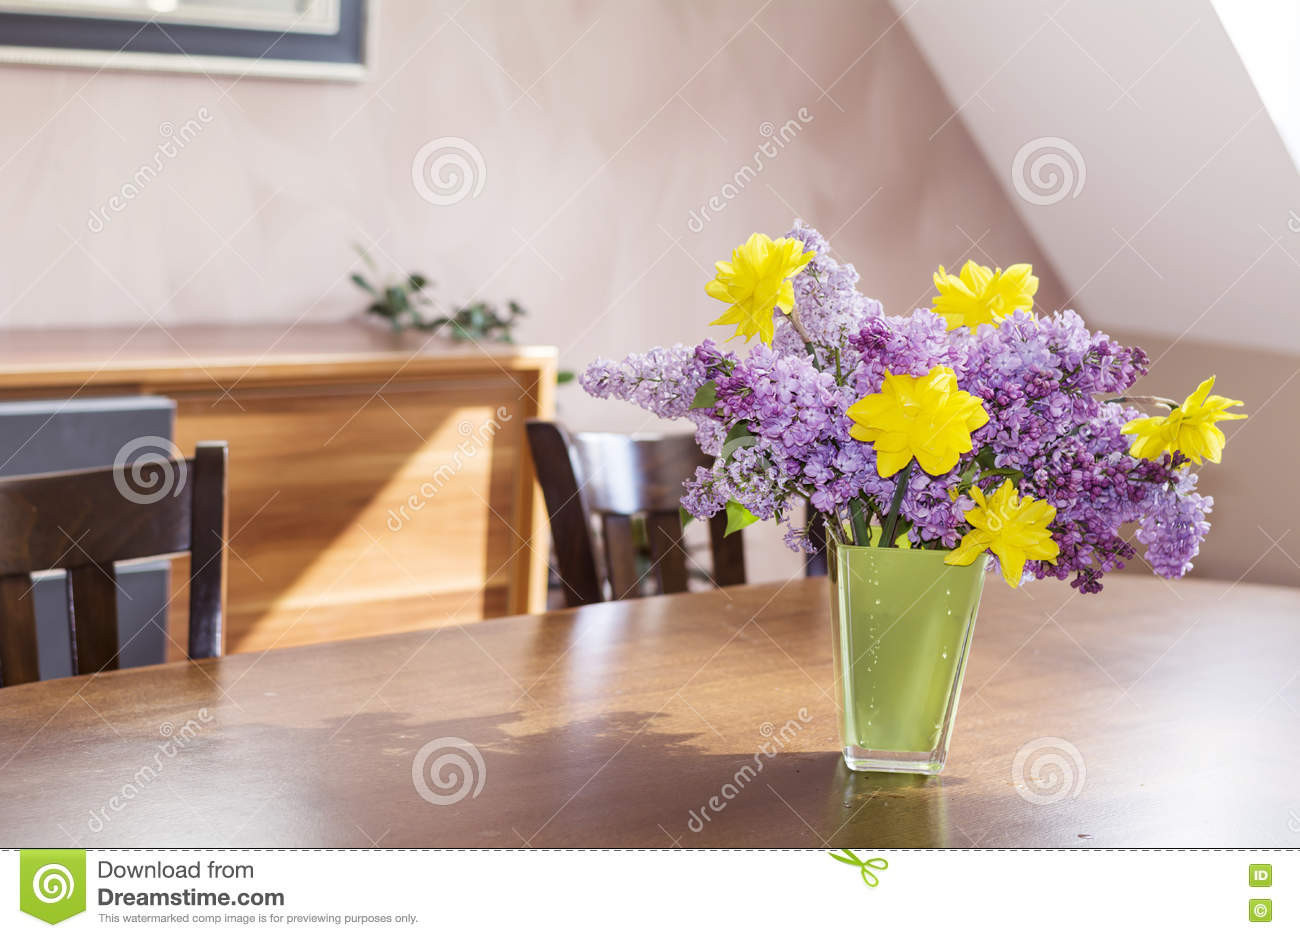 24 Nice Test Tube Flower Vase Rack 2024 free download test tube flower vase rack of wood and glass vase photograph yellow narcissus flowers and lilac in within wood and glass vase photograph yellow narcissus flowers and lilac in a green glass v